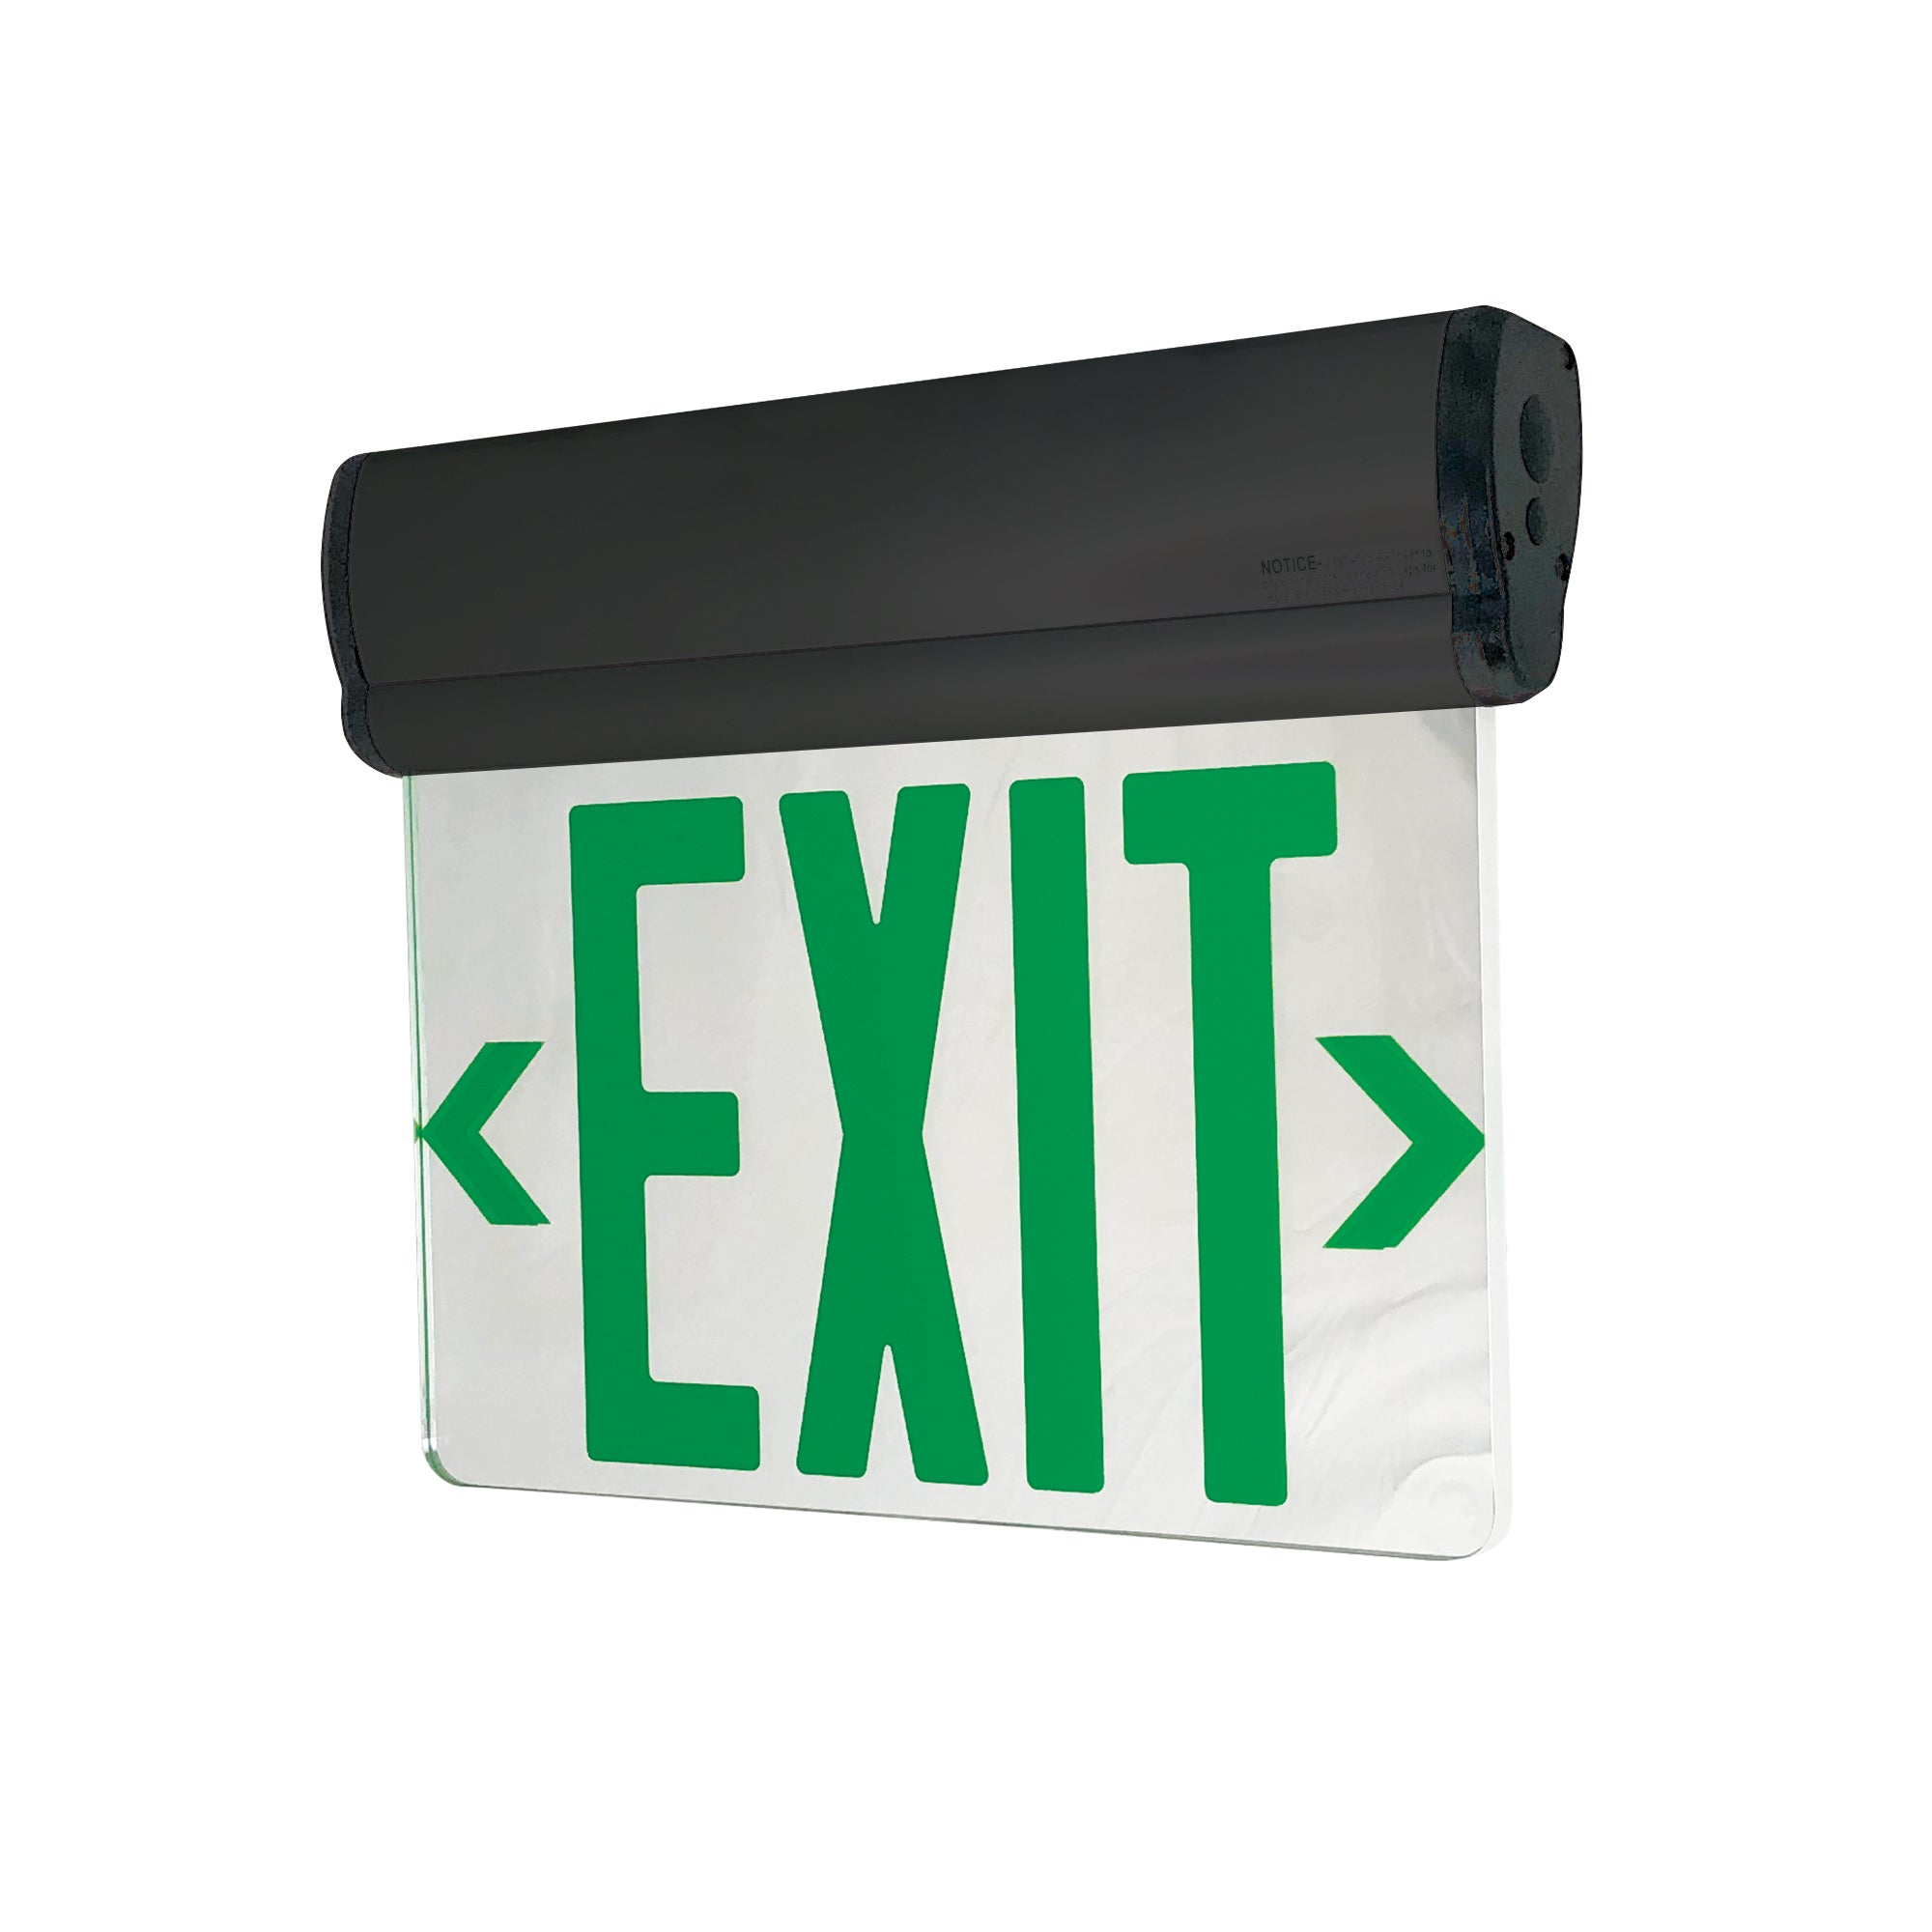 Nora Lighting NX-812-LEDGMB - Exit / Emergency - Surface Adjustable LED Edge-Lit Exit Sign, Battery Backup, 6 Inch Green Letters, Single Face / Mirrored Acrylic, Black Housing